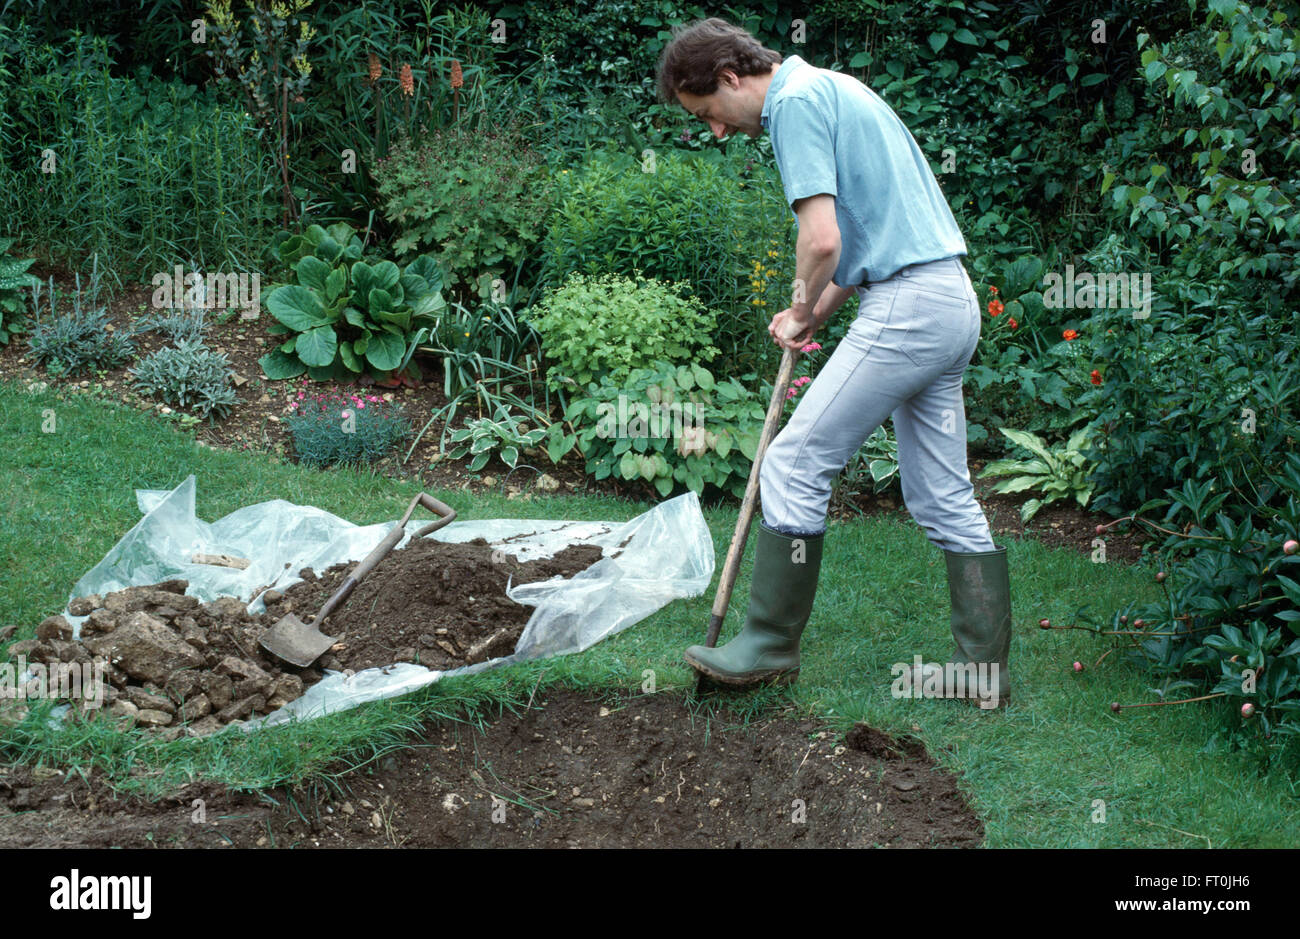 Gardener digging out measured area in lawn for a new pond         FOR EDITORIAL USE ONLY Stock Photo